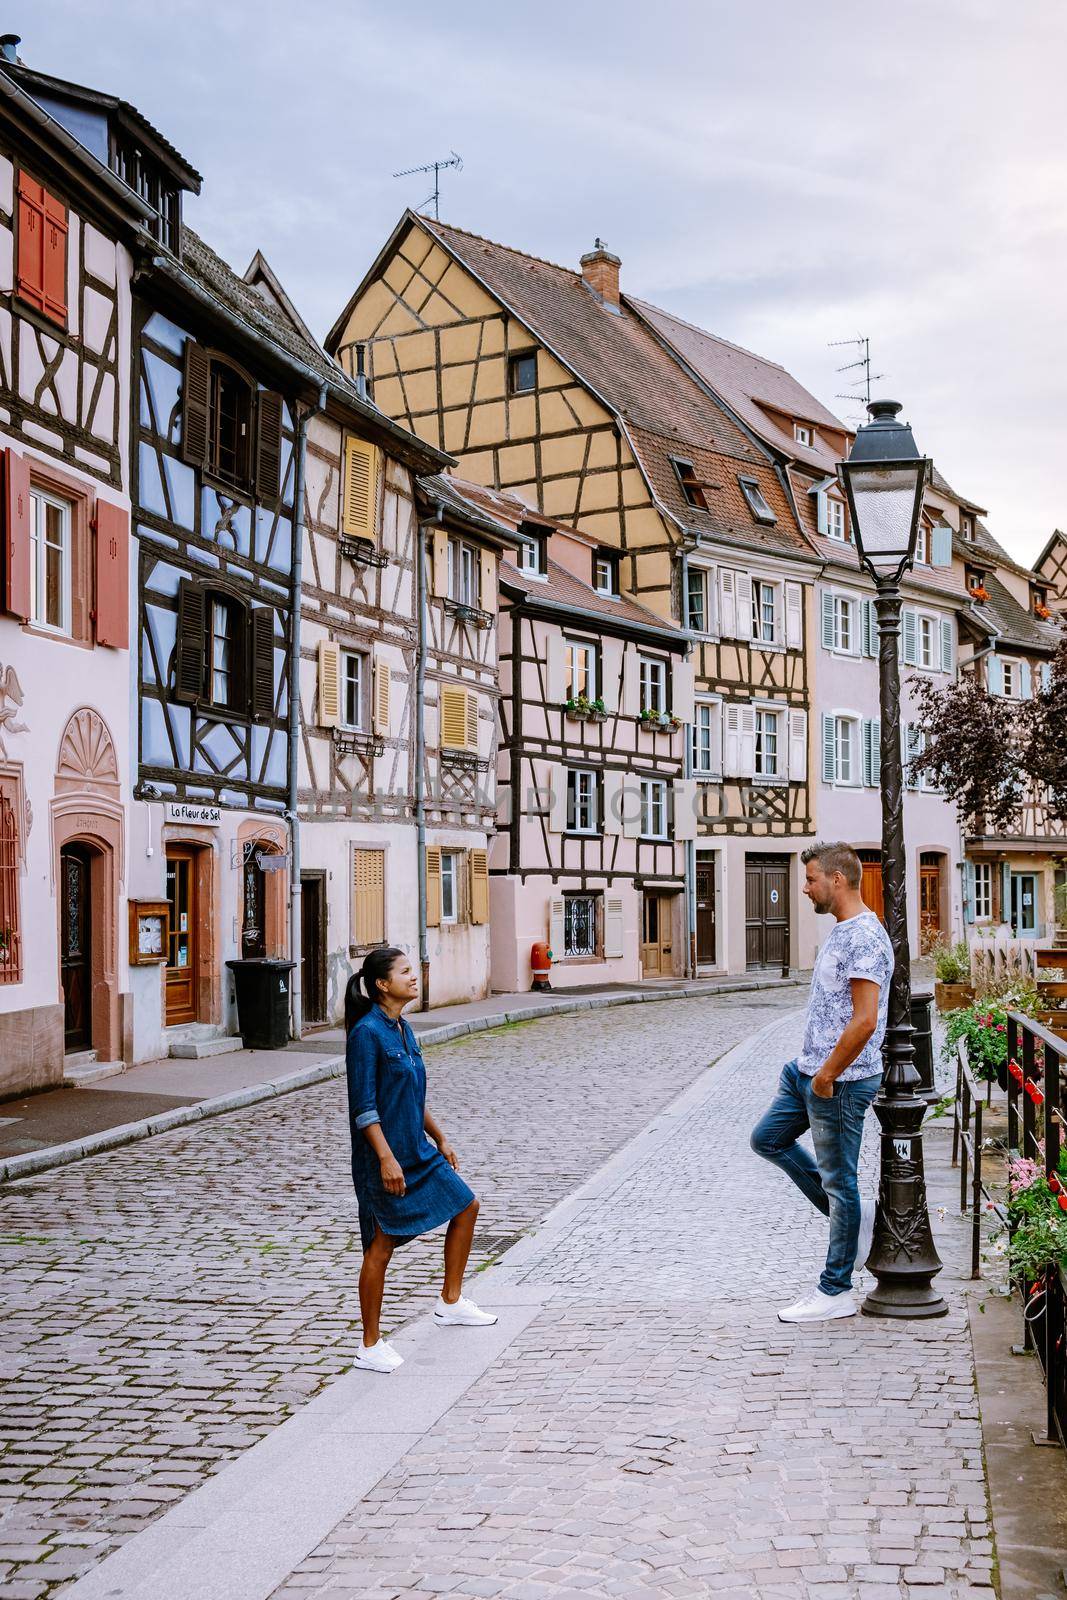 couple on city trip Colmar, Alsace, France. Petite Venice, water canal and traditional half timbered houses. Colmar is a charming town in Alsace, France. Beautiful view of colorful romantic city Colmar, France, Alsace by fokkebok